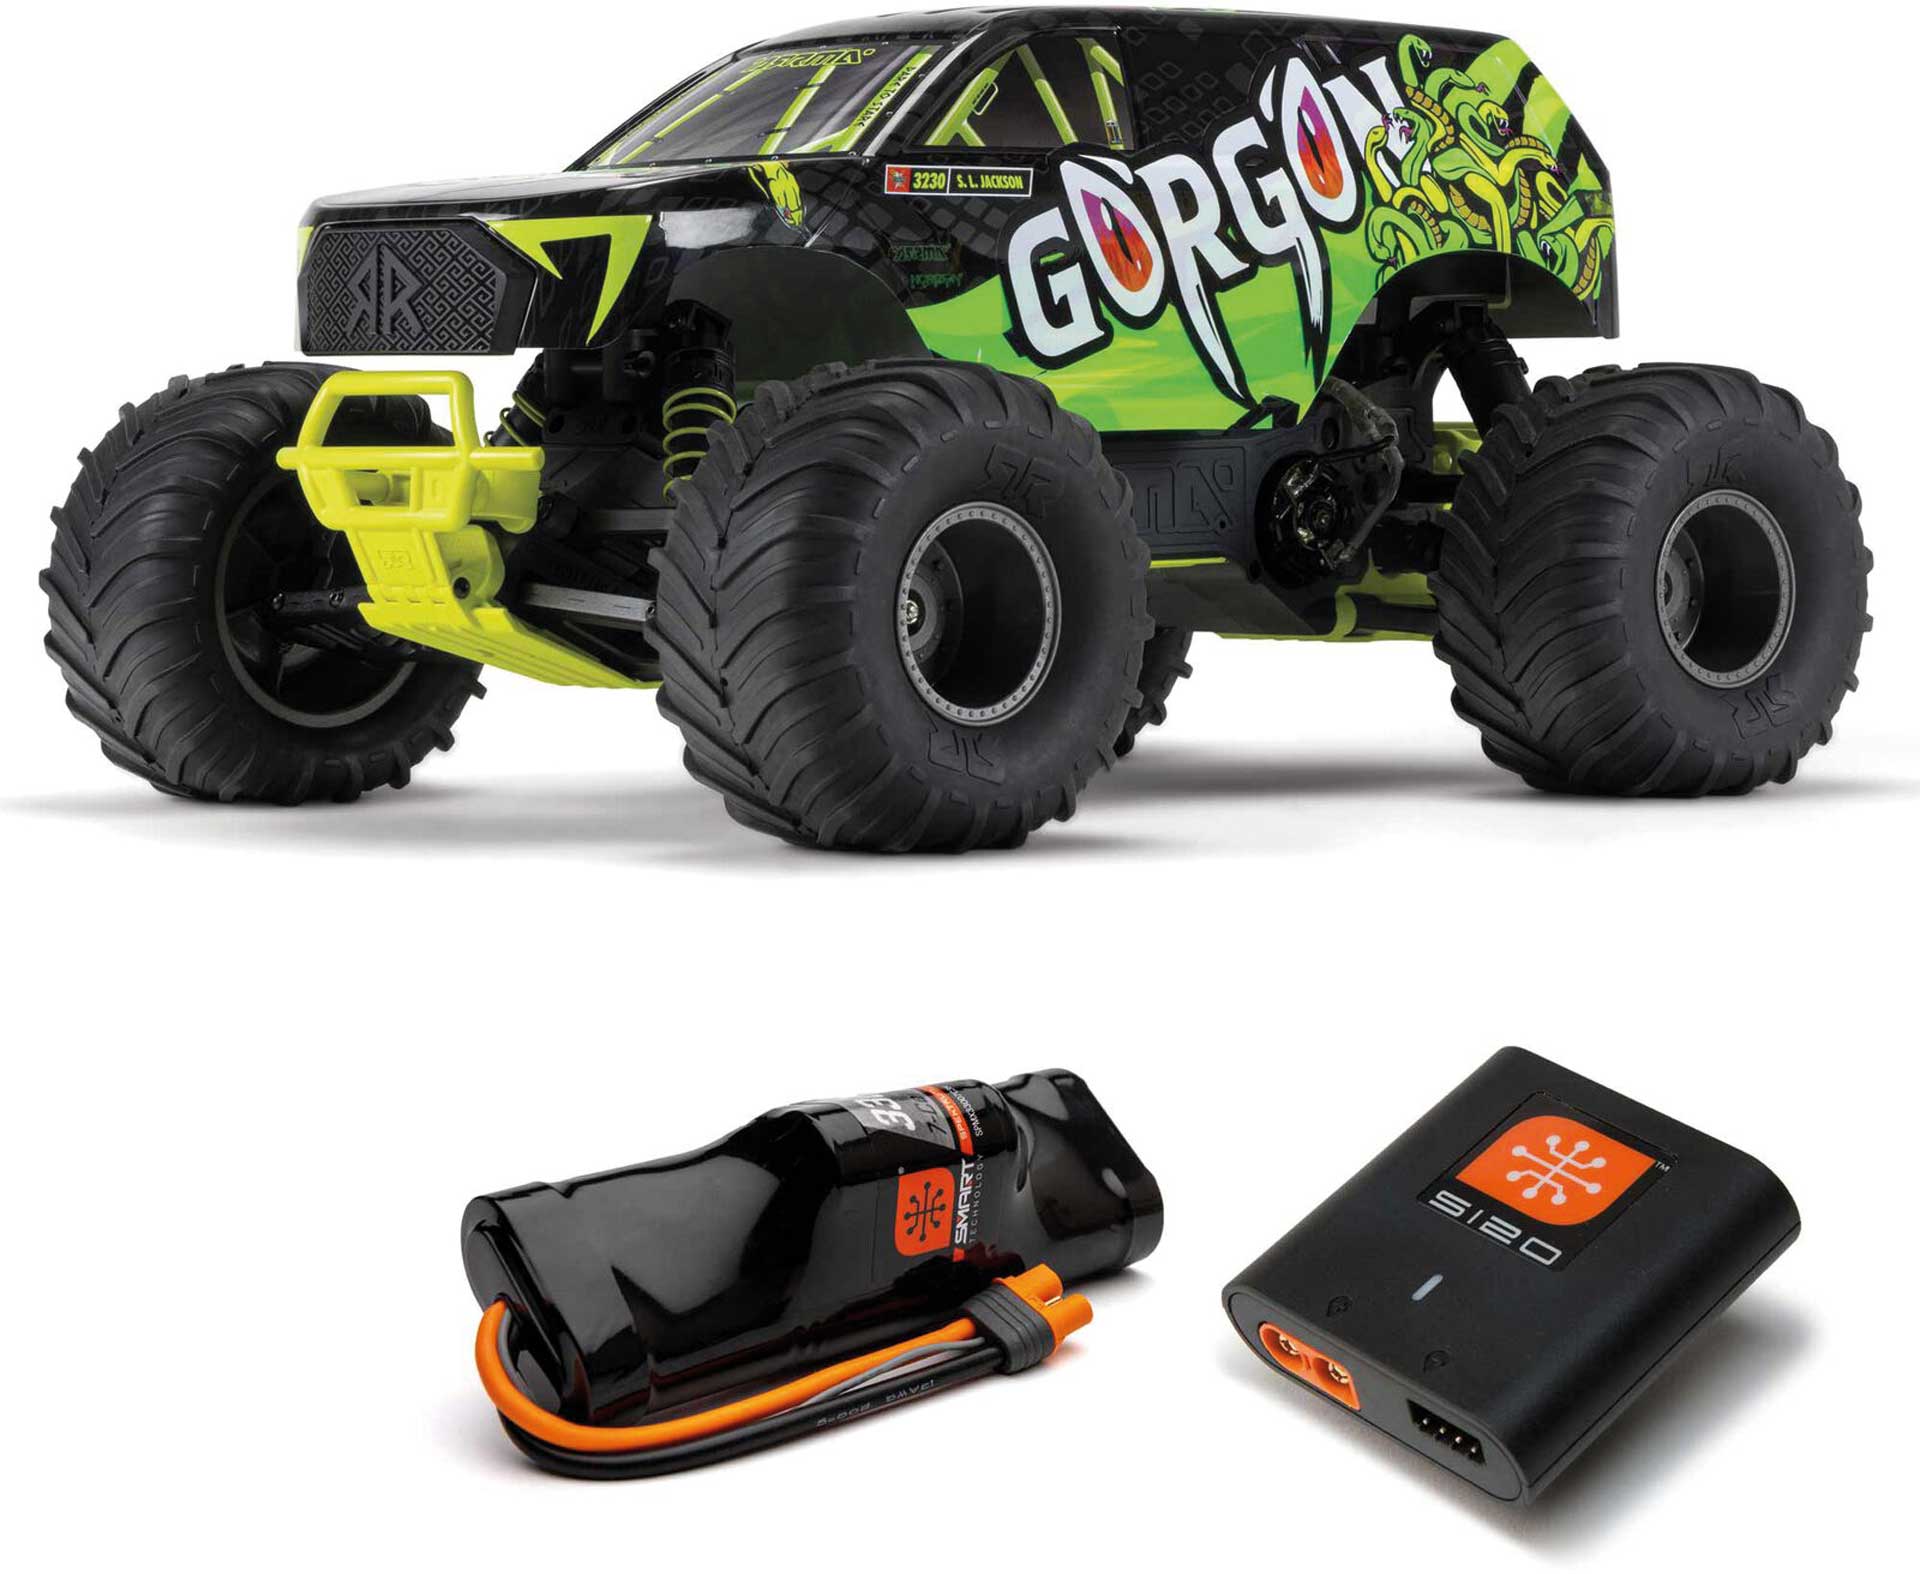 ARRMA 1/10 GORGON 4X2 MEGA 550 Brushed Monster Truck RTR Yellow with battery and charger